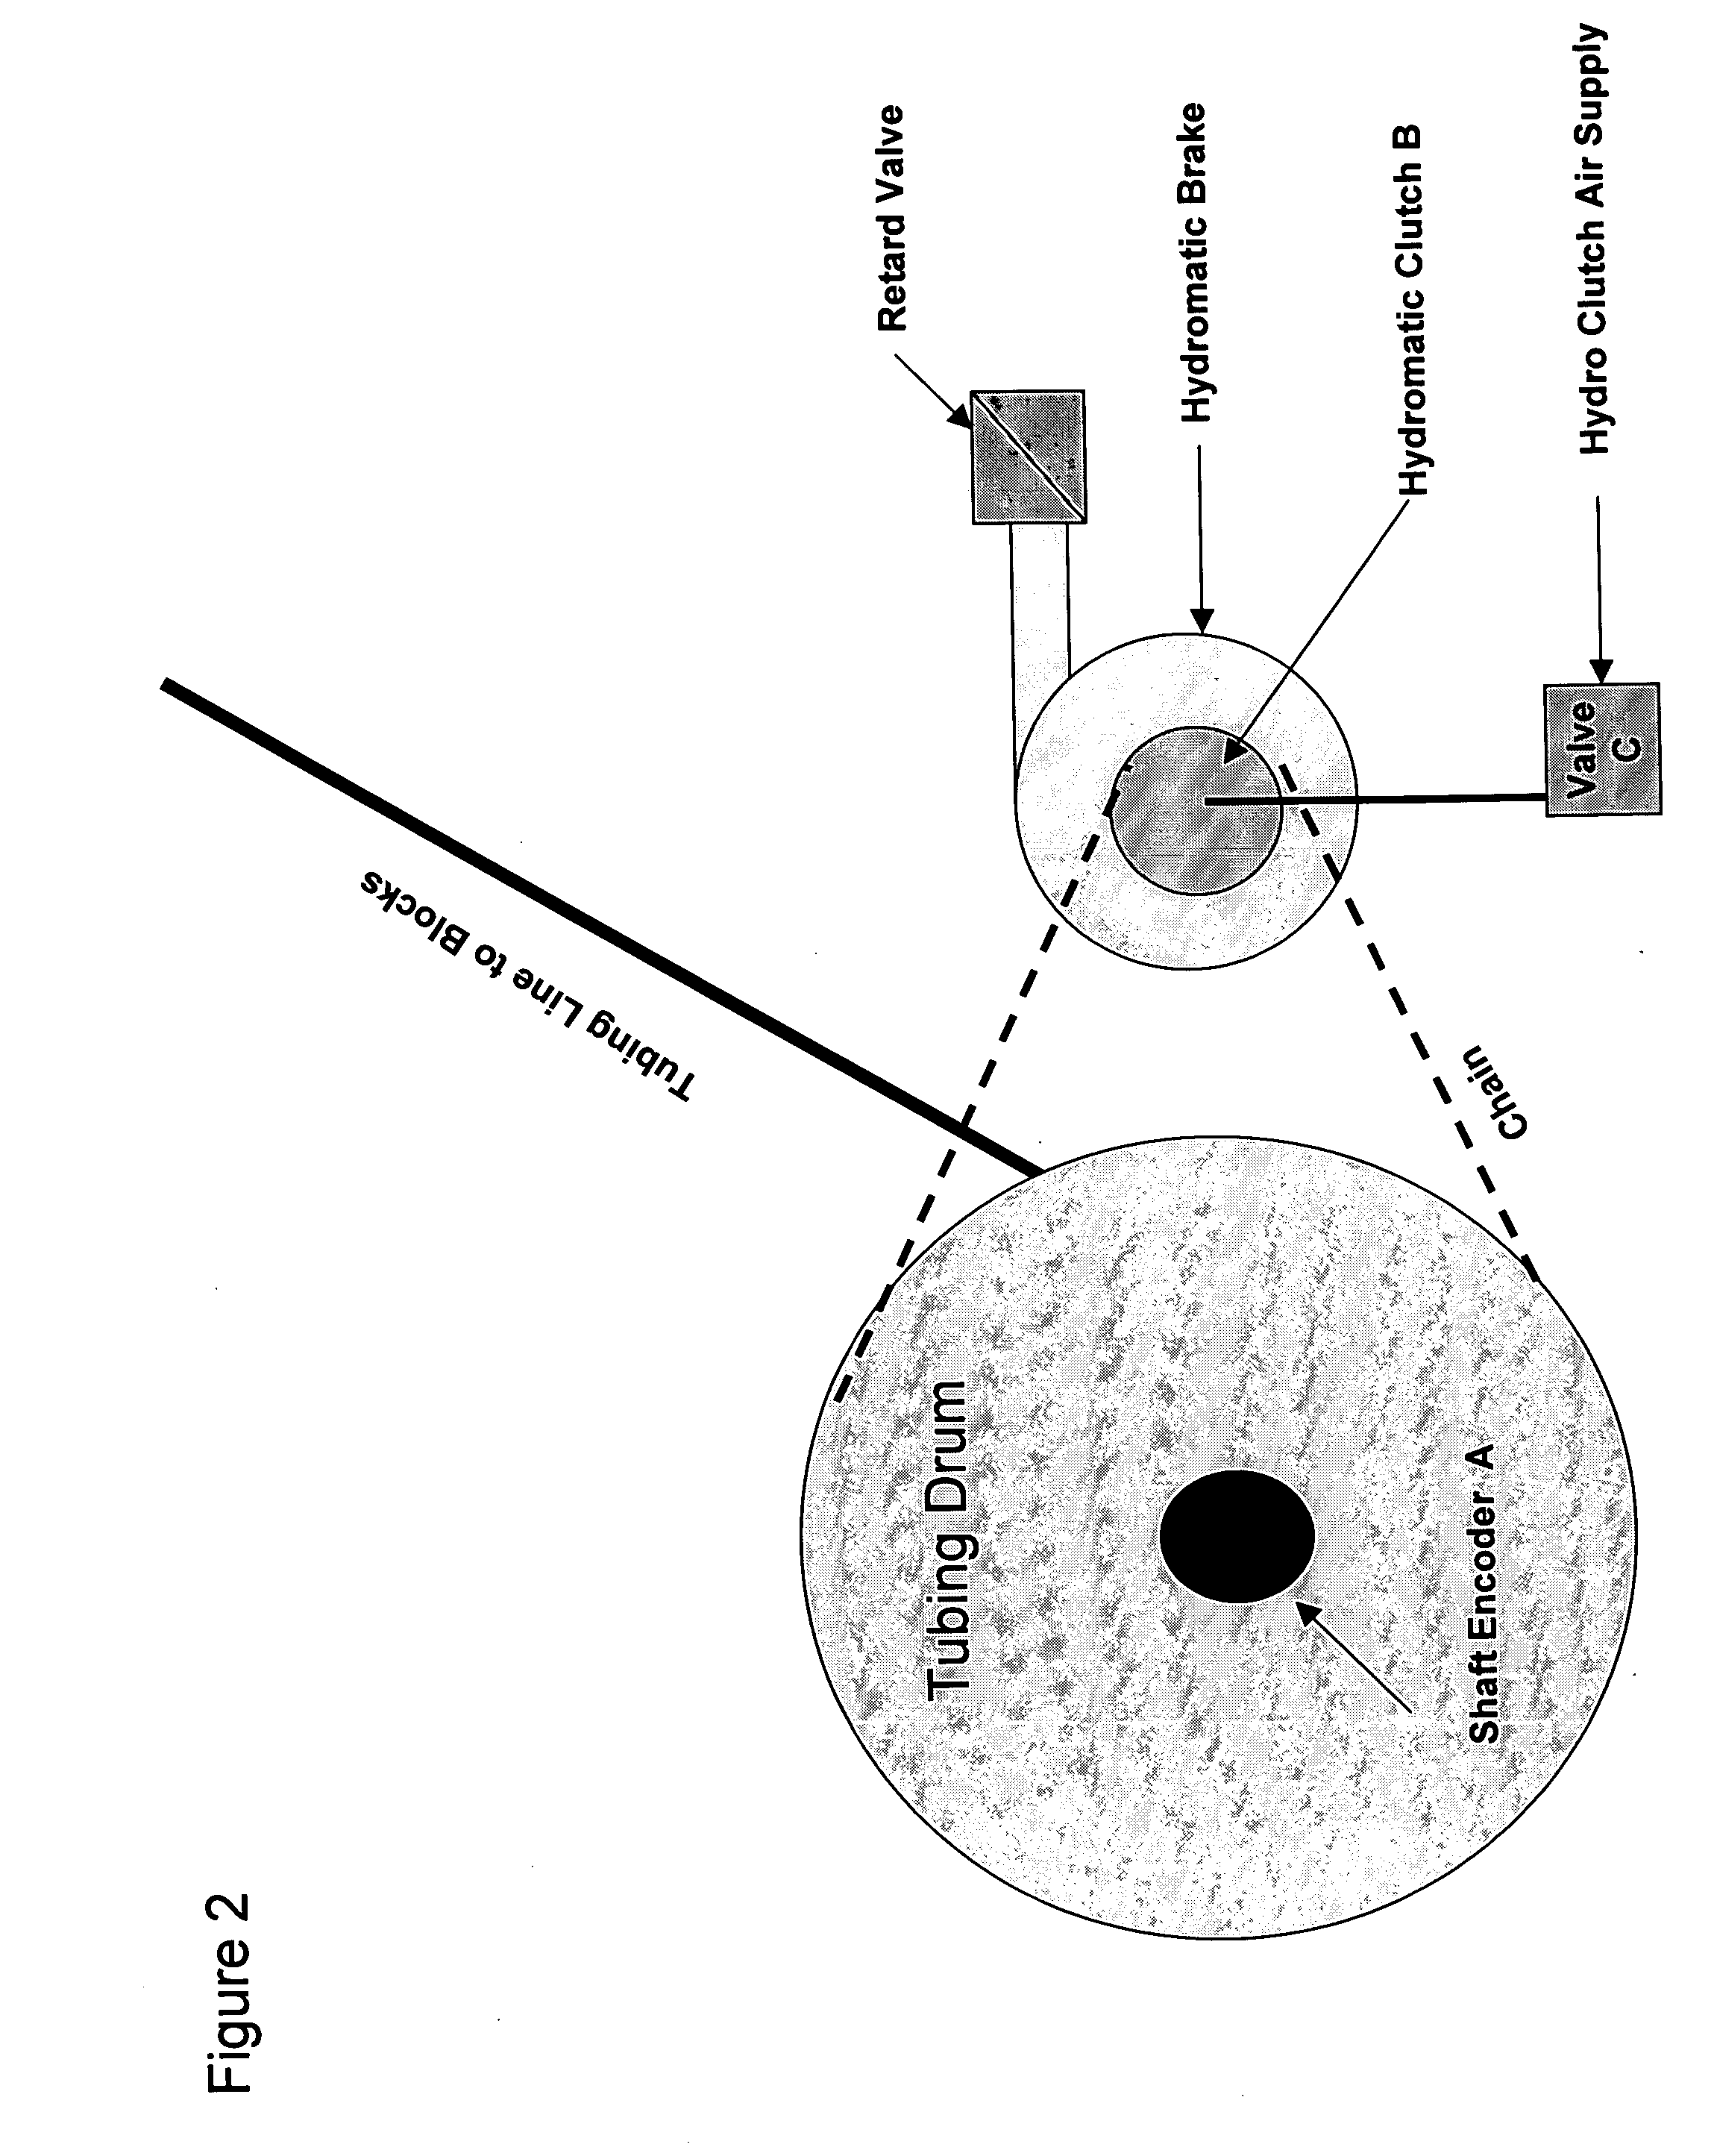 System for assuring engagement of a hydromatic brake on a drilling or well service rig